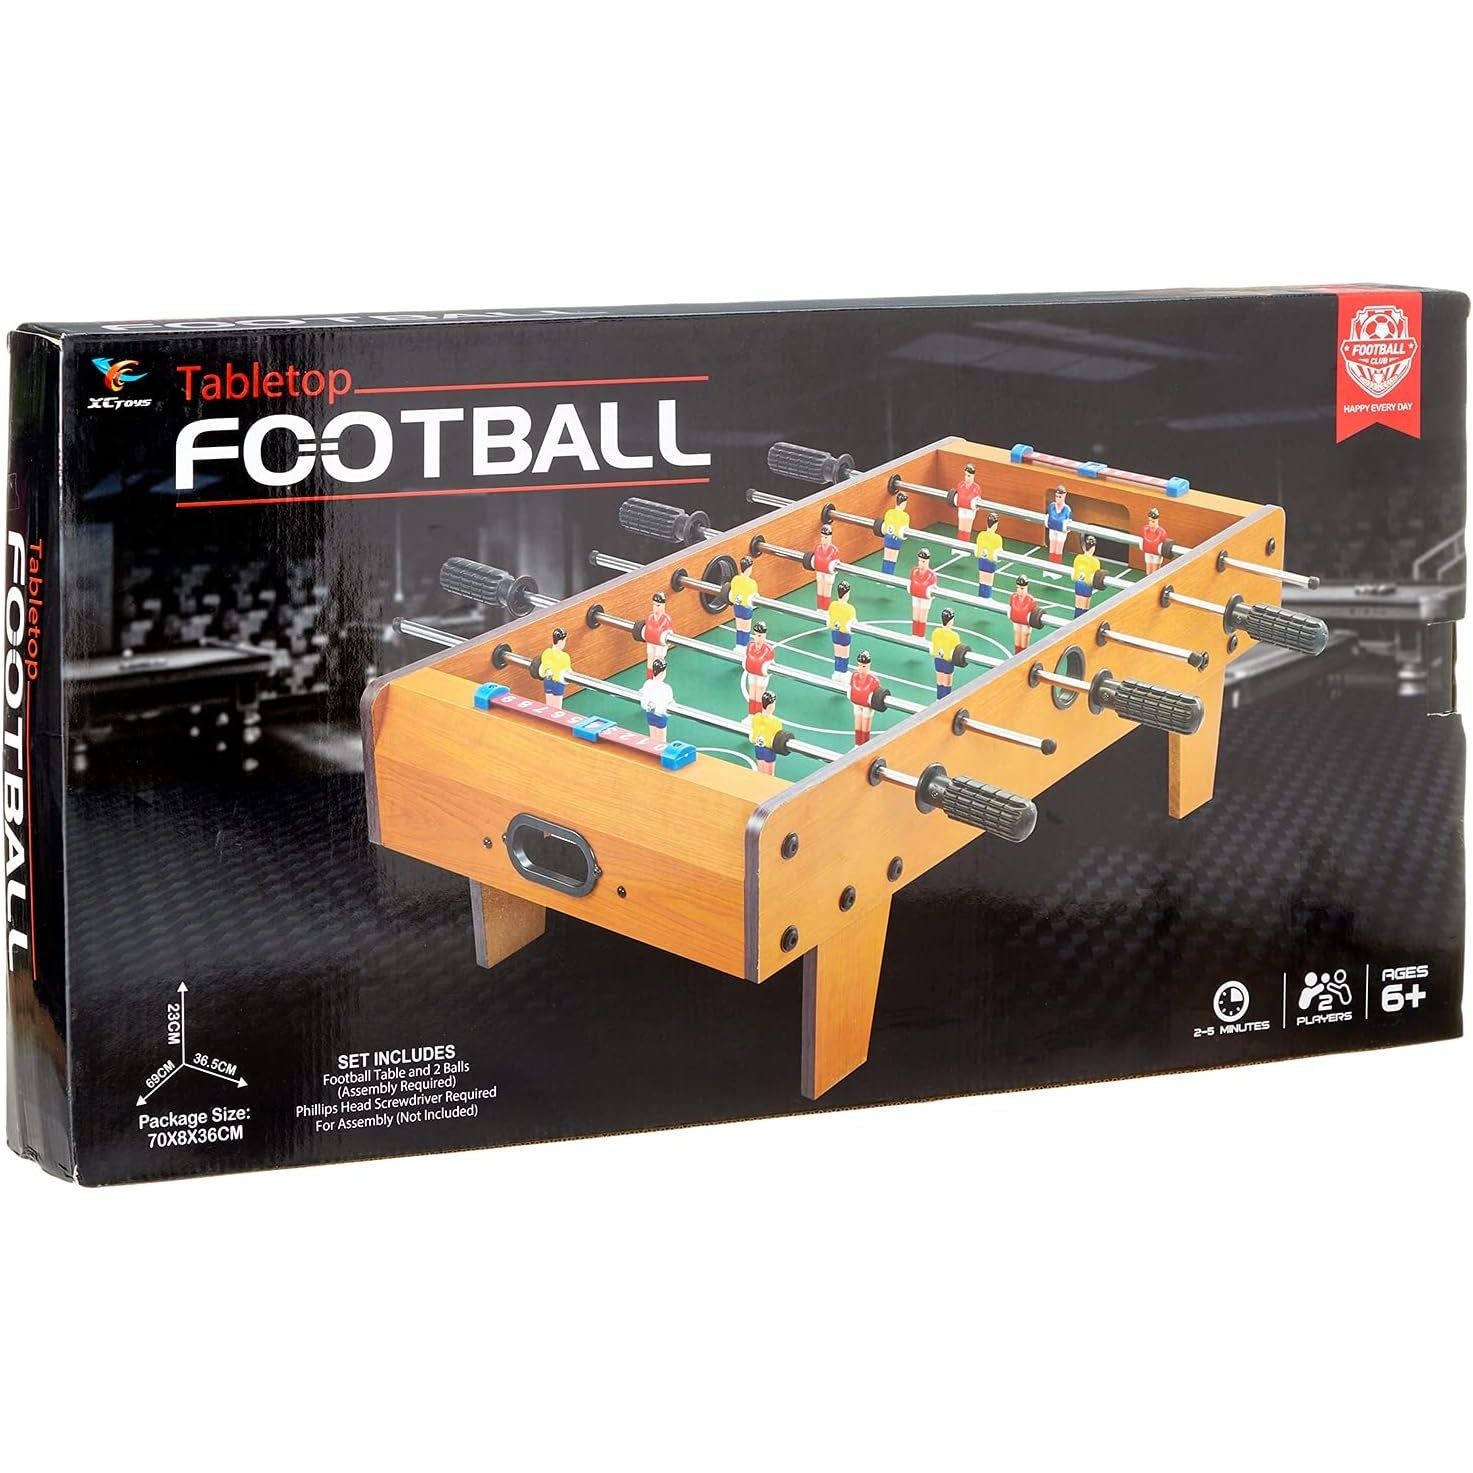 XC Toys 2332 Football Tabletop Game for Kids, 23 x 69 x 36.5 cm